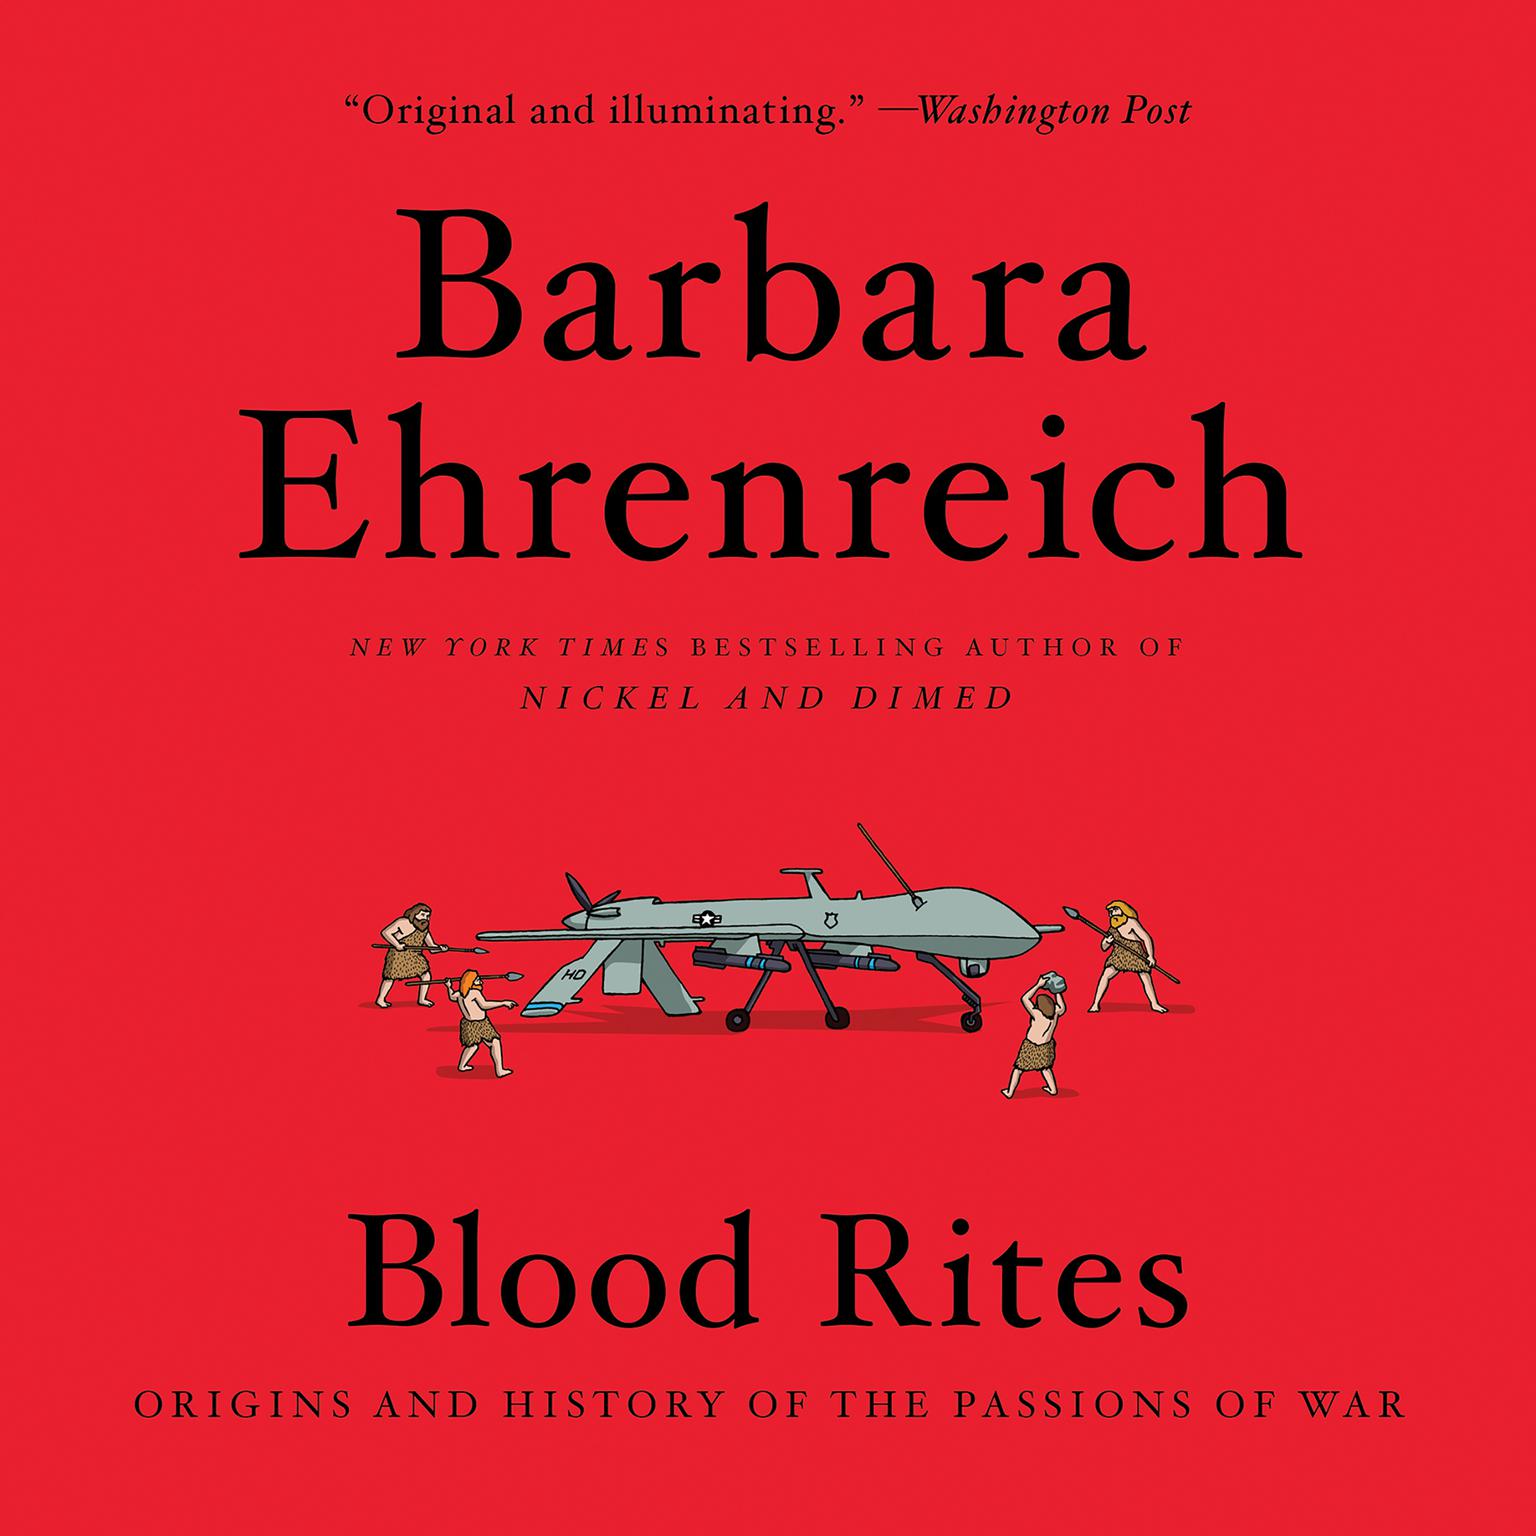 Blood Rites: Origins and History of the Passions of War Audiobook, by Barbara Ehrenreich